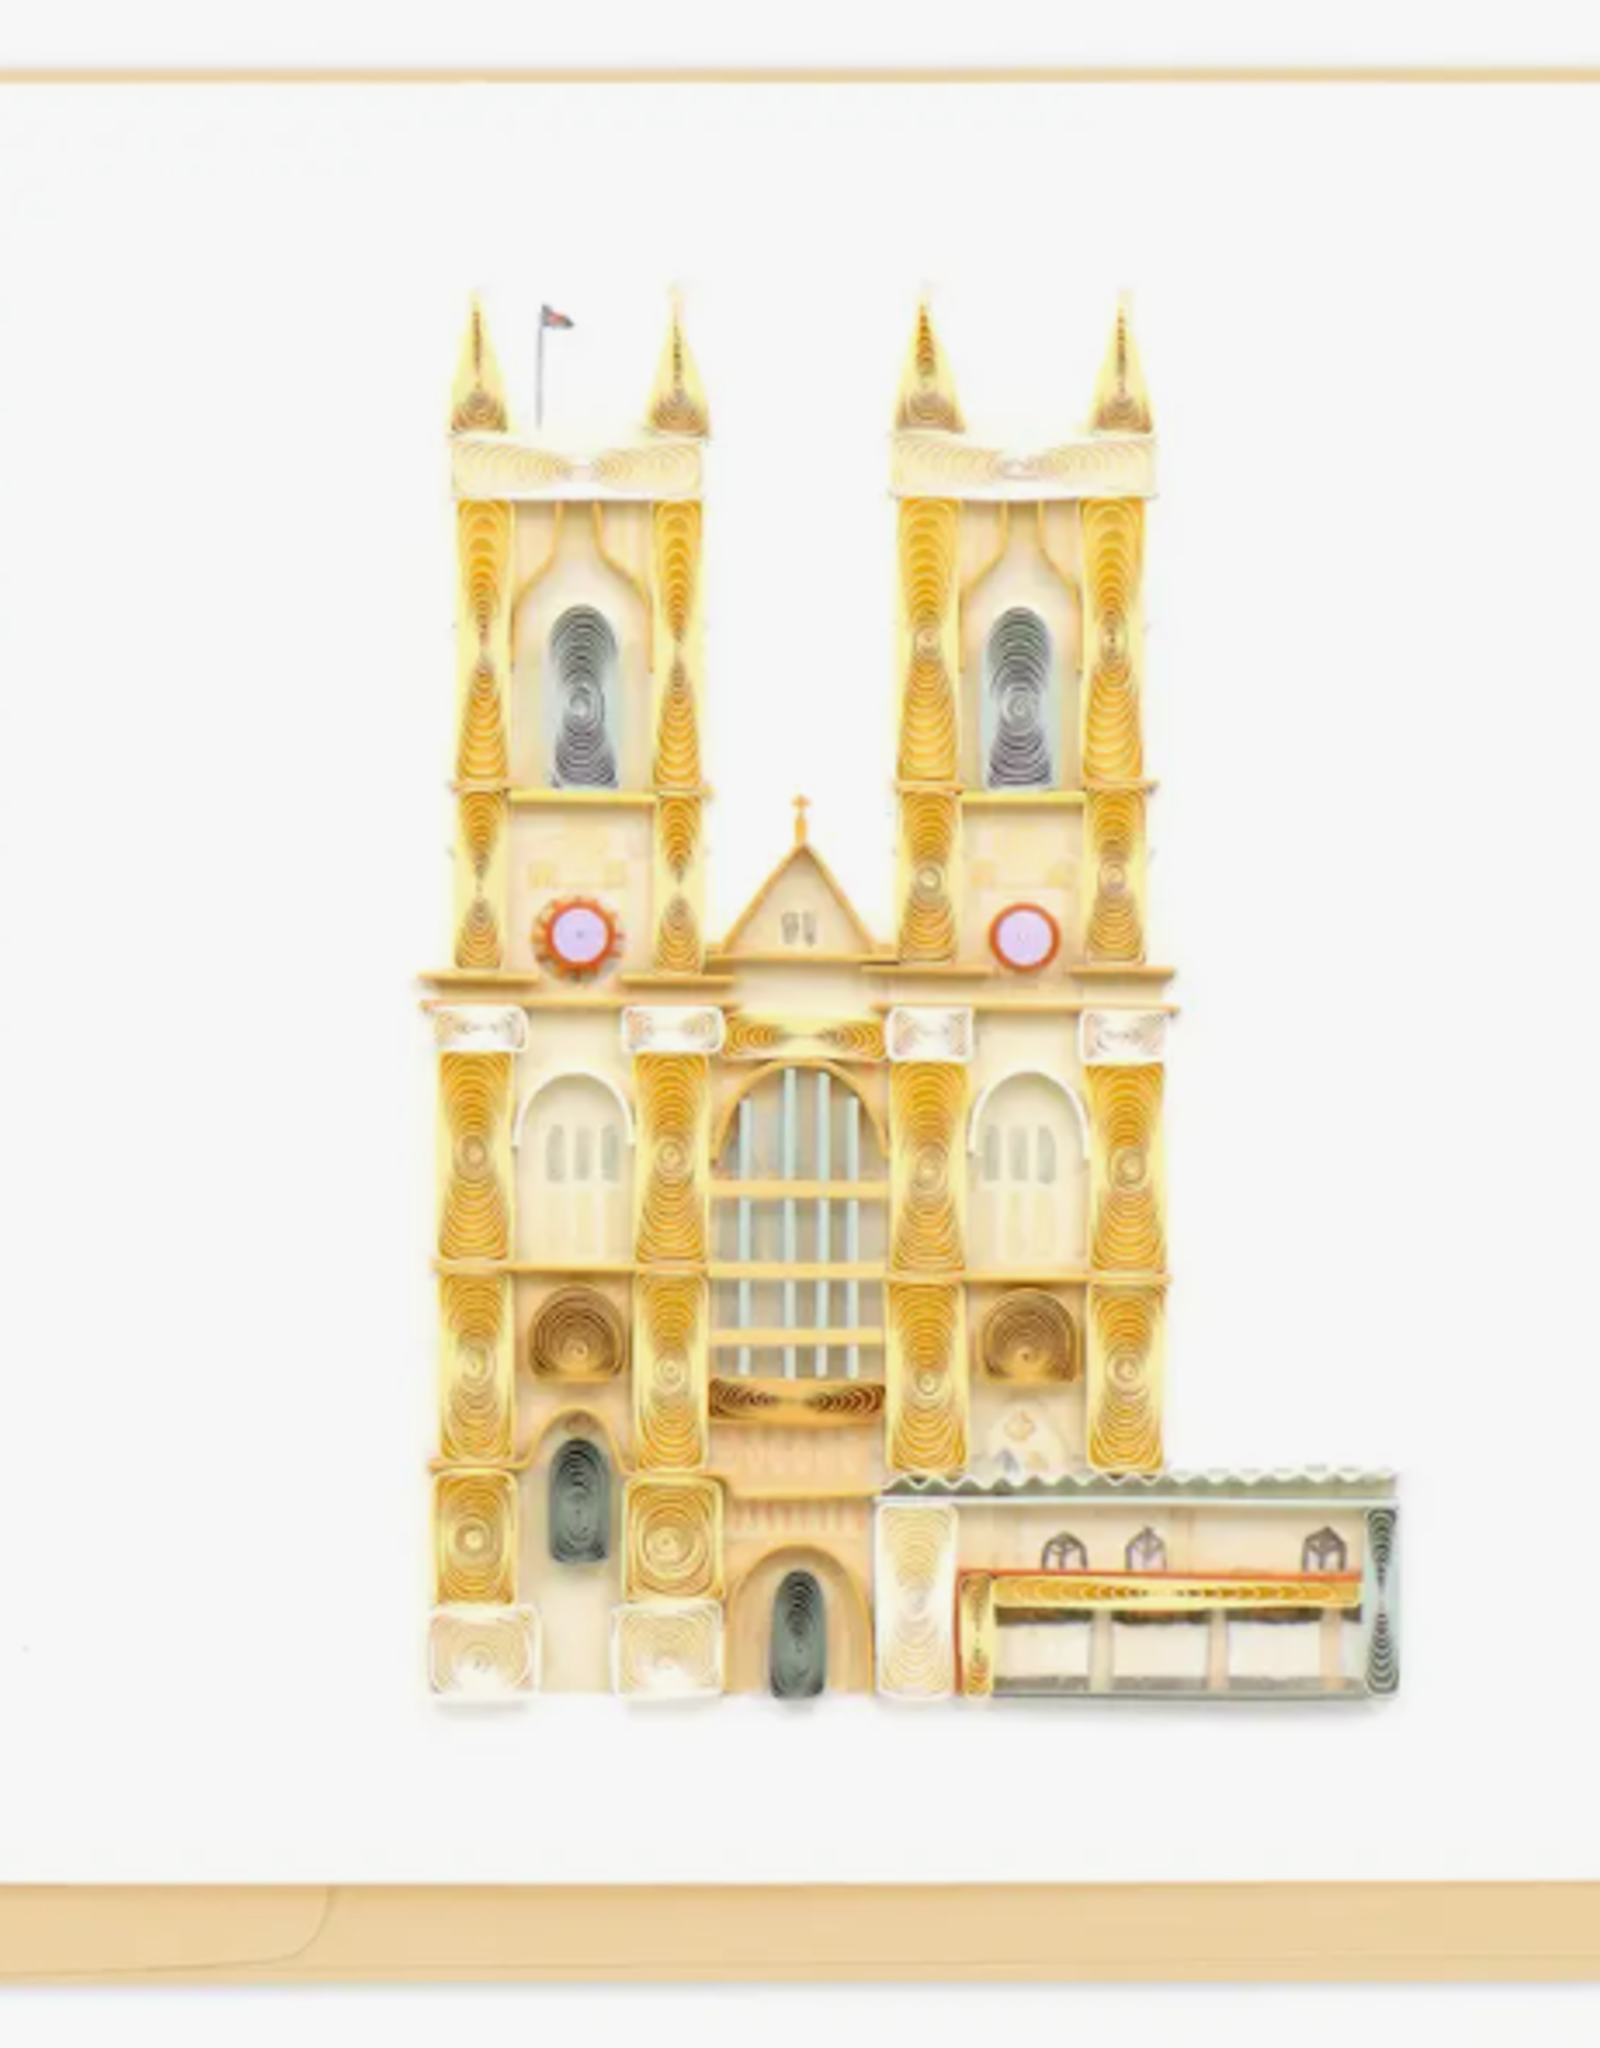 Quilling Card Quilled Westminster Abbey Greeting Card